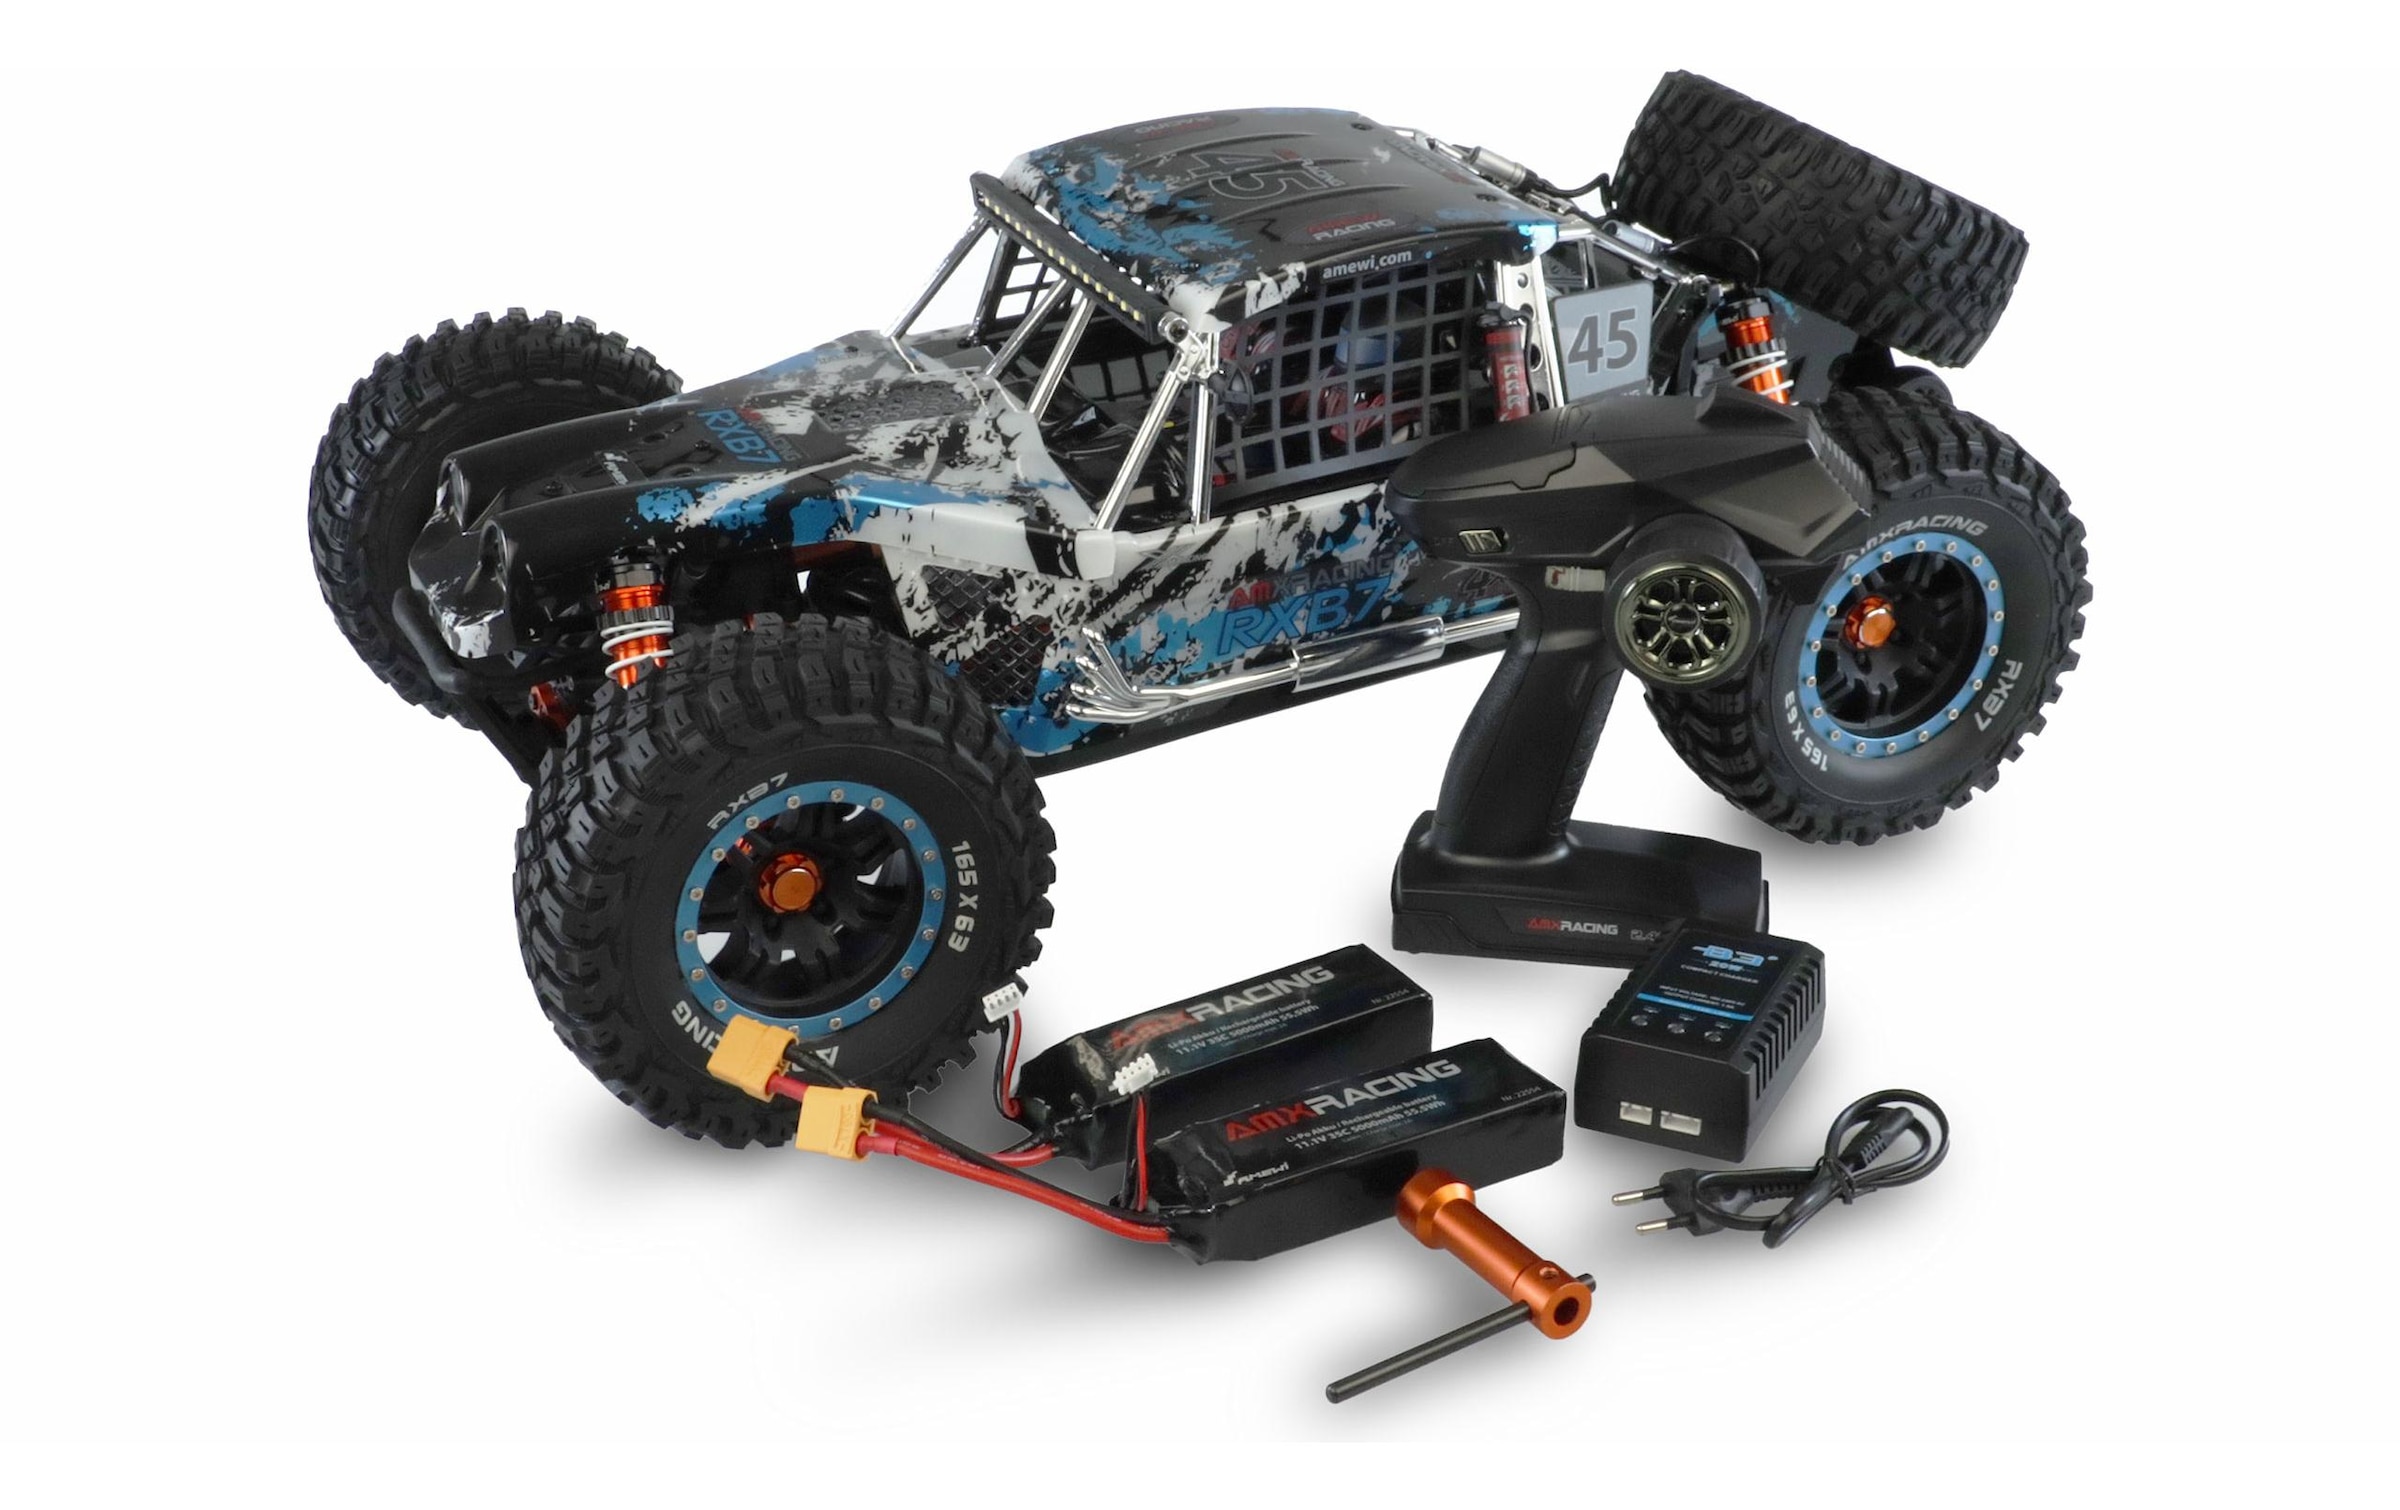 Amewi RC-Buggy »AMXRacing RXB7 6S 4WD«